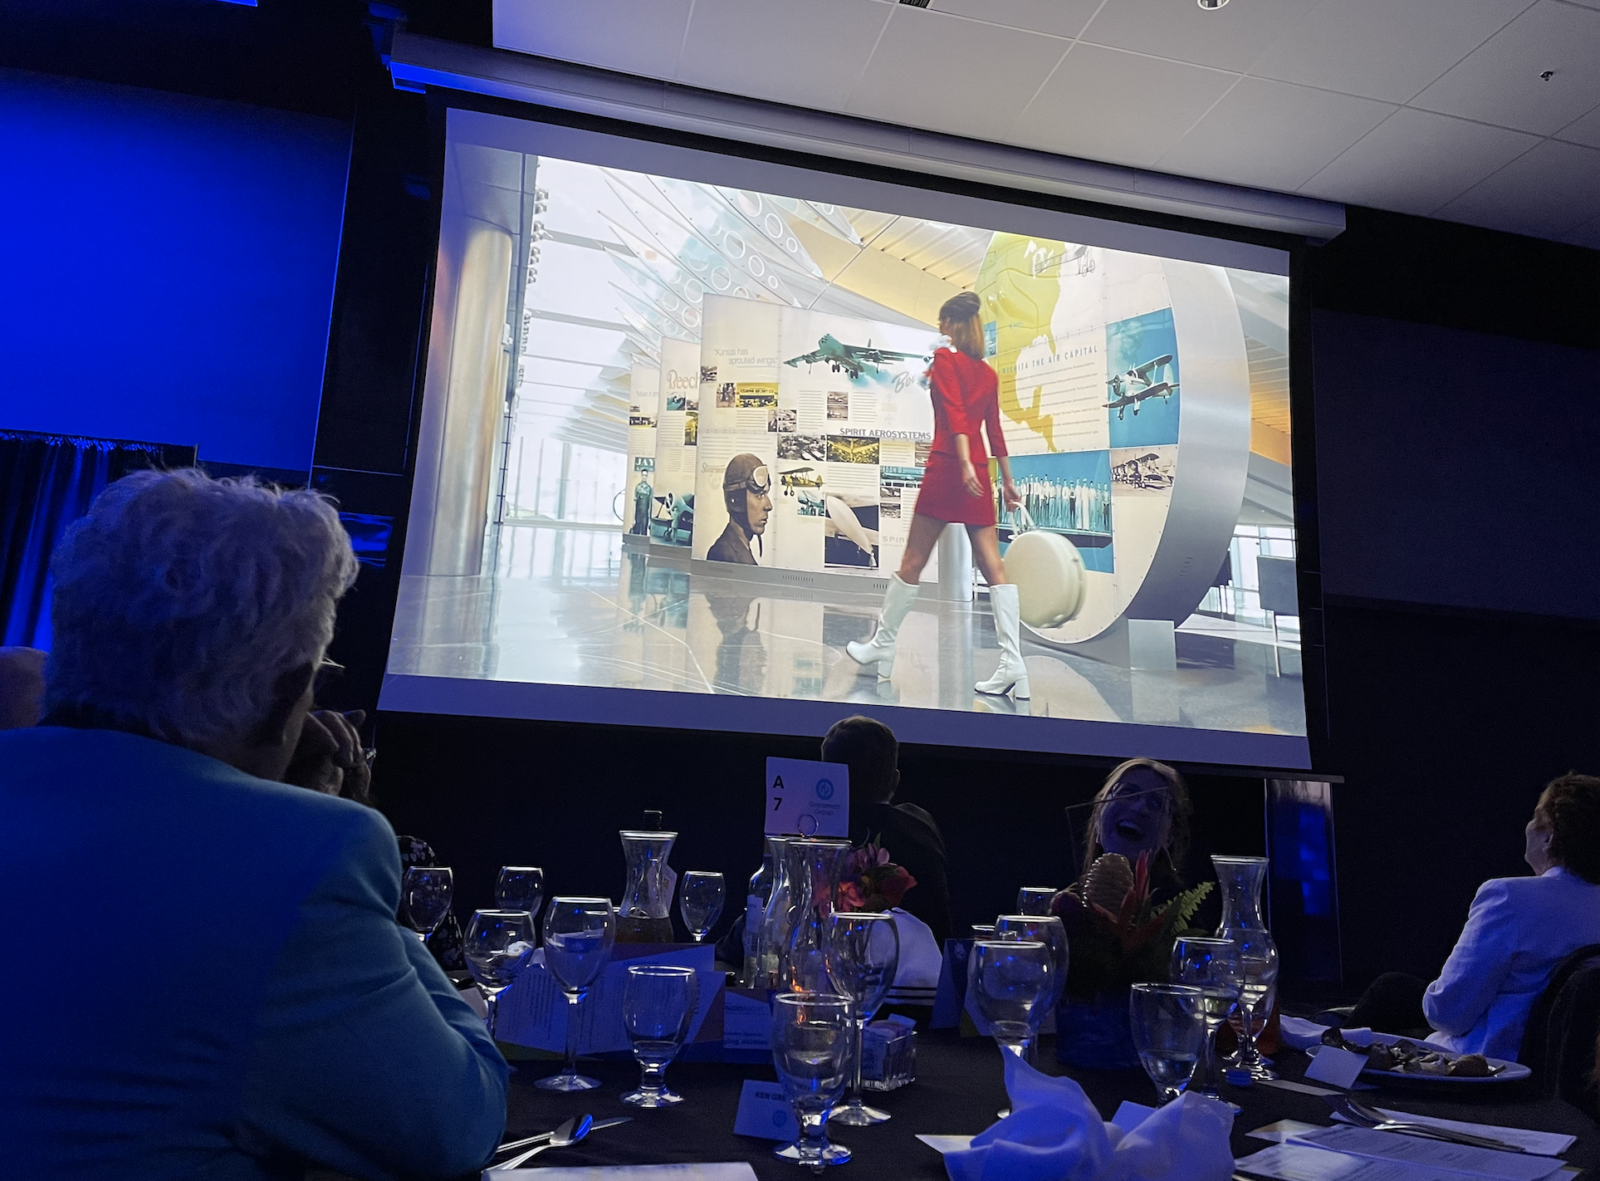 Image of GiGi, Greteman Group's mascot walking through the airport projected onto a screen for a ballroom full of the Chamber's Honors Night attendees to see as Greteman Group received the Over the Years Awars